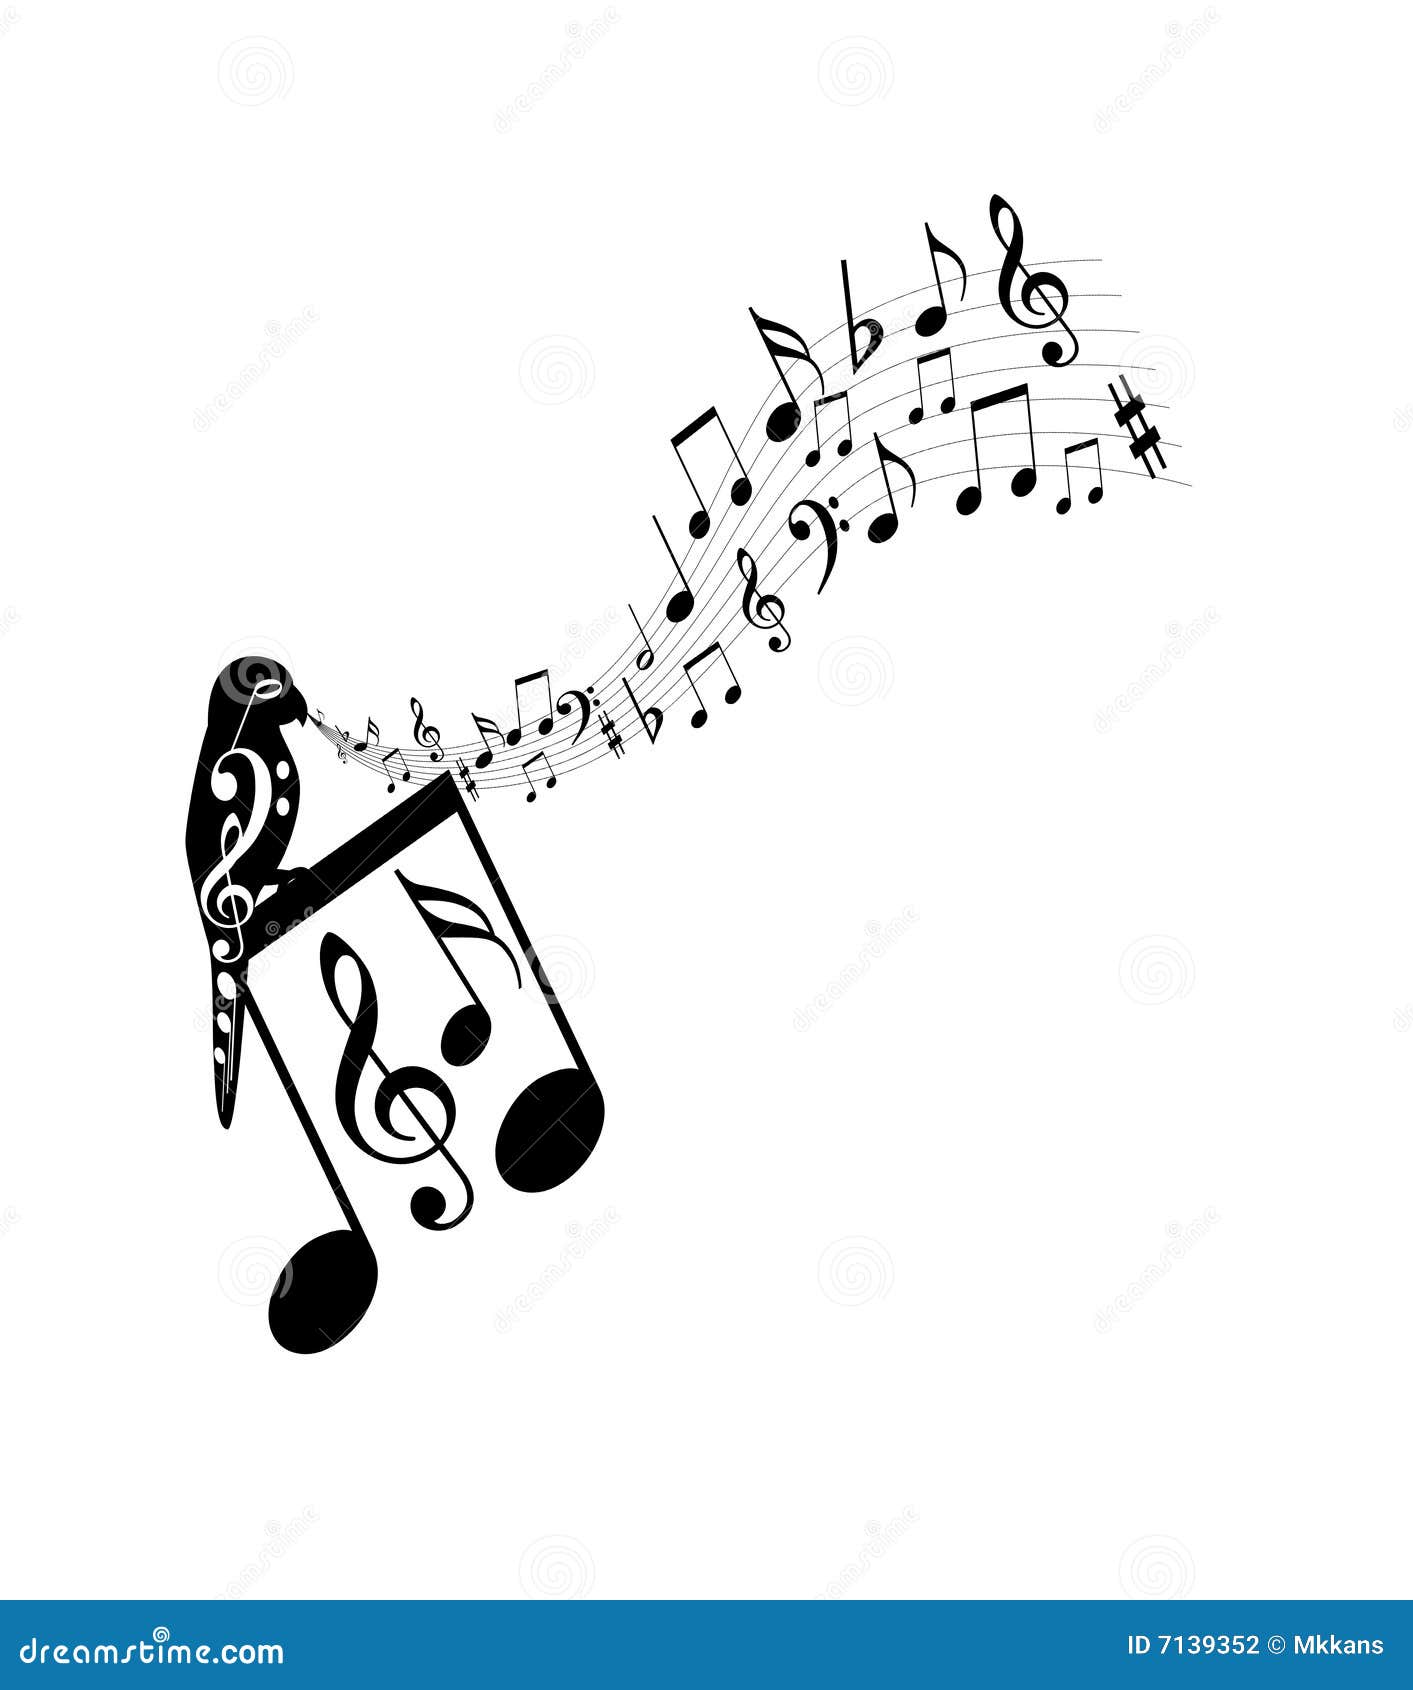 Music notes stock illustration. Image of notes, parrots - 7139352